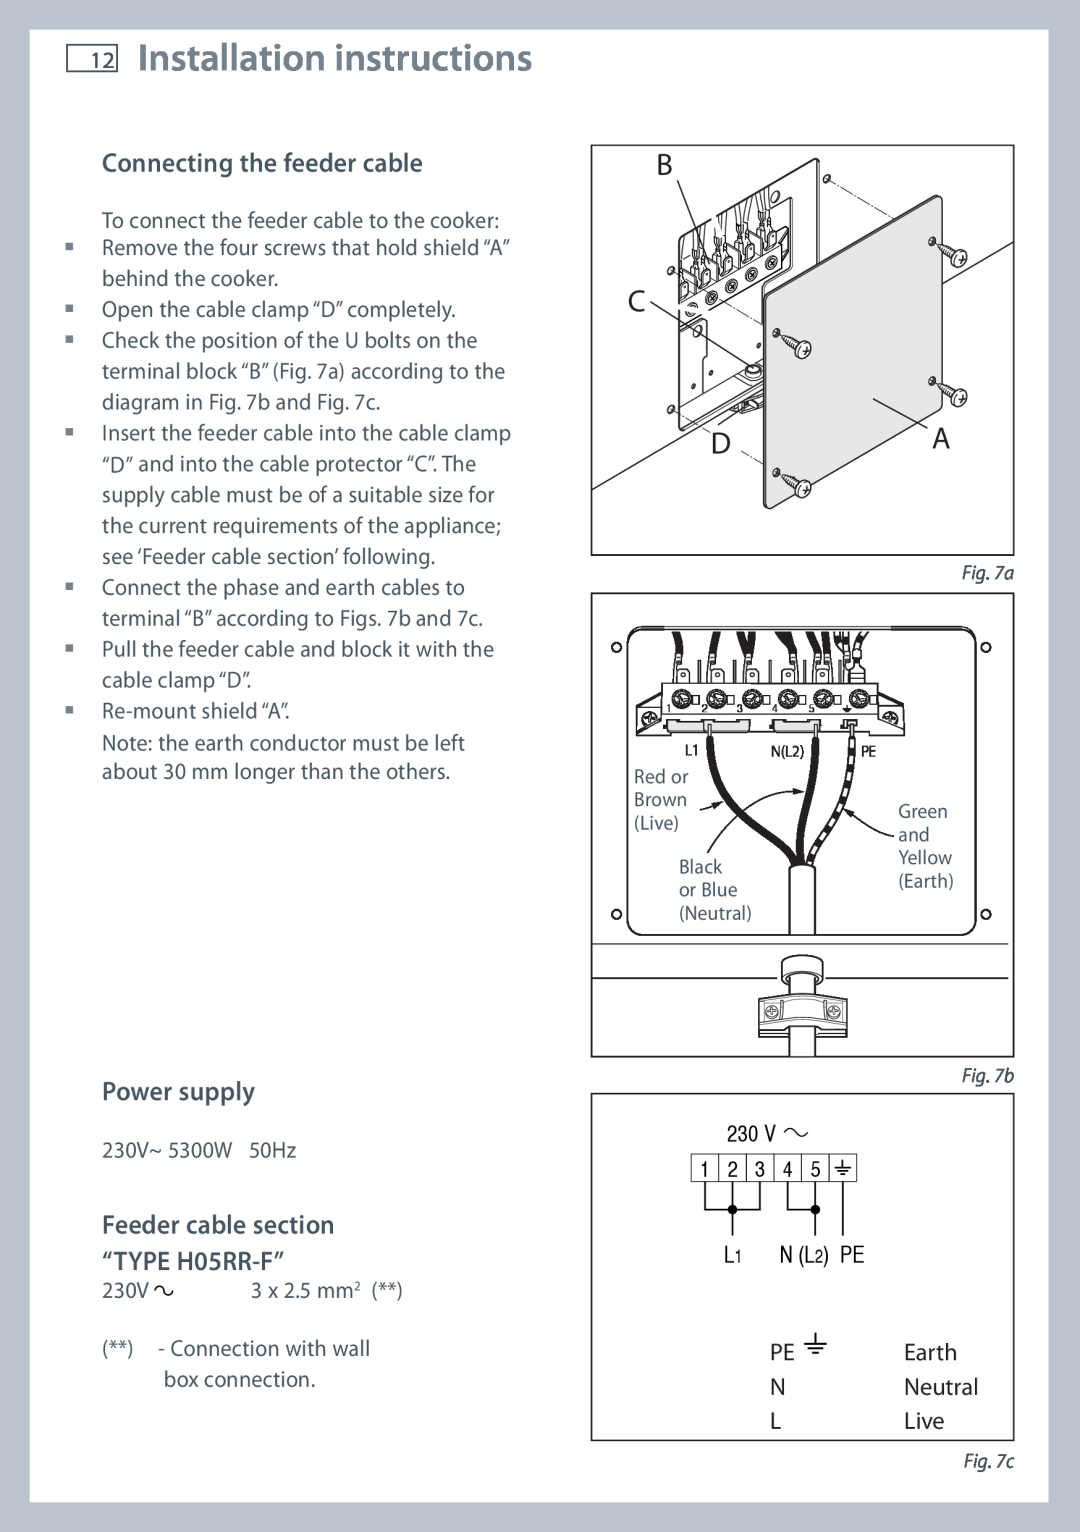 Fisher & Paykel OR120 Installation instructions, B C Da, Connecting the feeder cable, Power supply, N Neutral LLive 